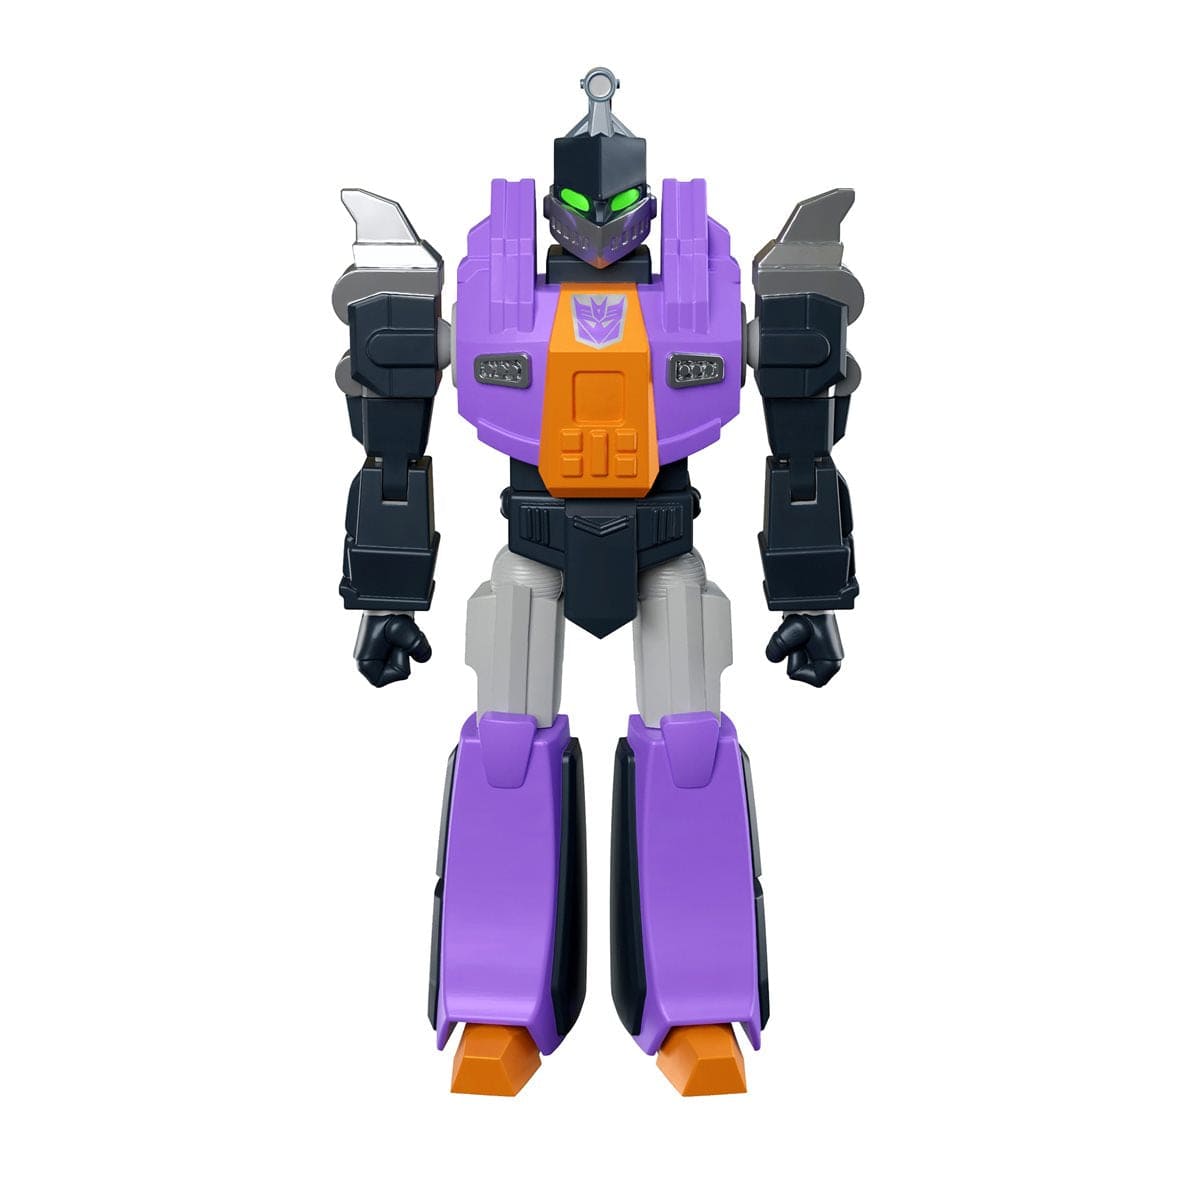 Transformers Ultimates Bombshell 7-inch Action Figure - Pop-O-Loco - Super7